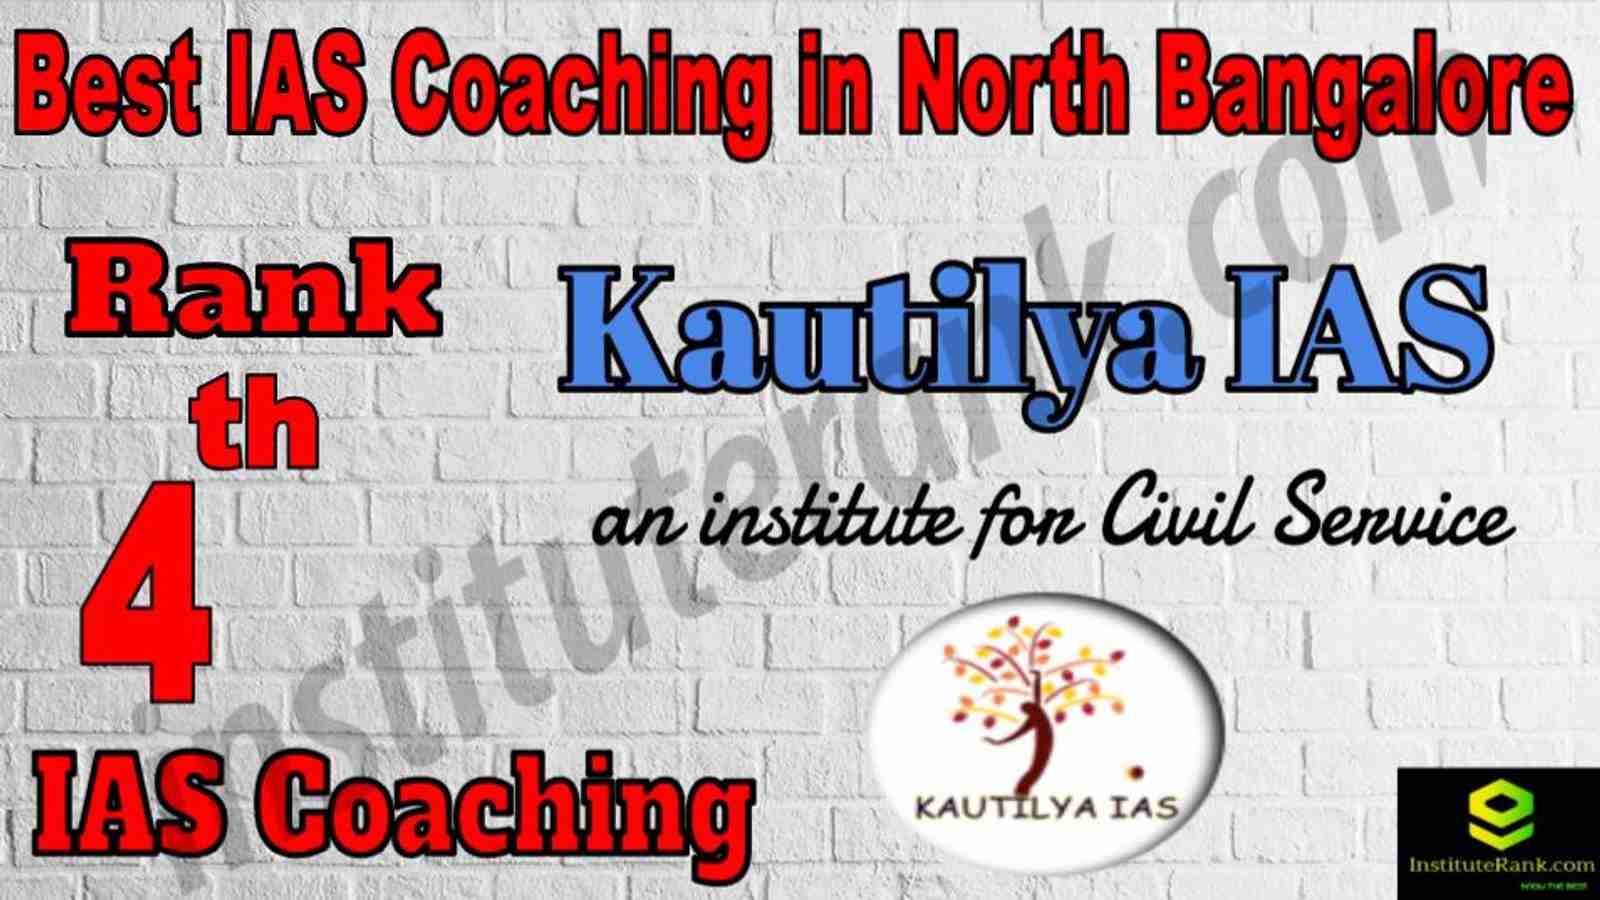 4th Best IAS Coaching in North Bangalore